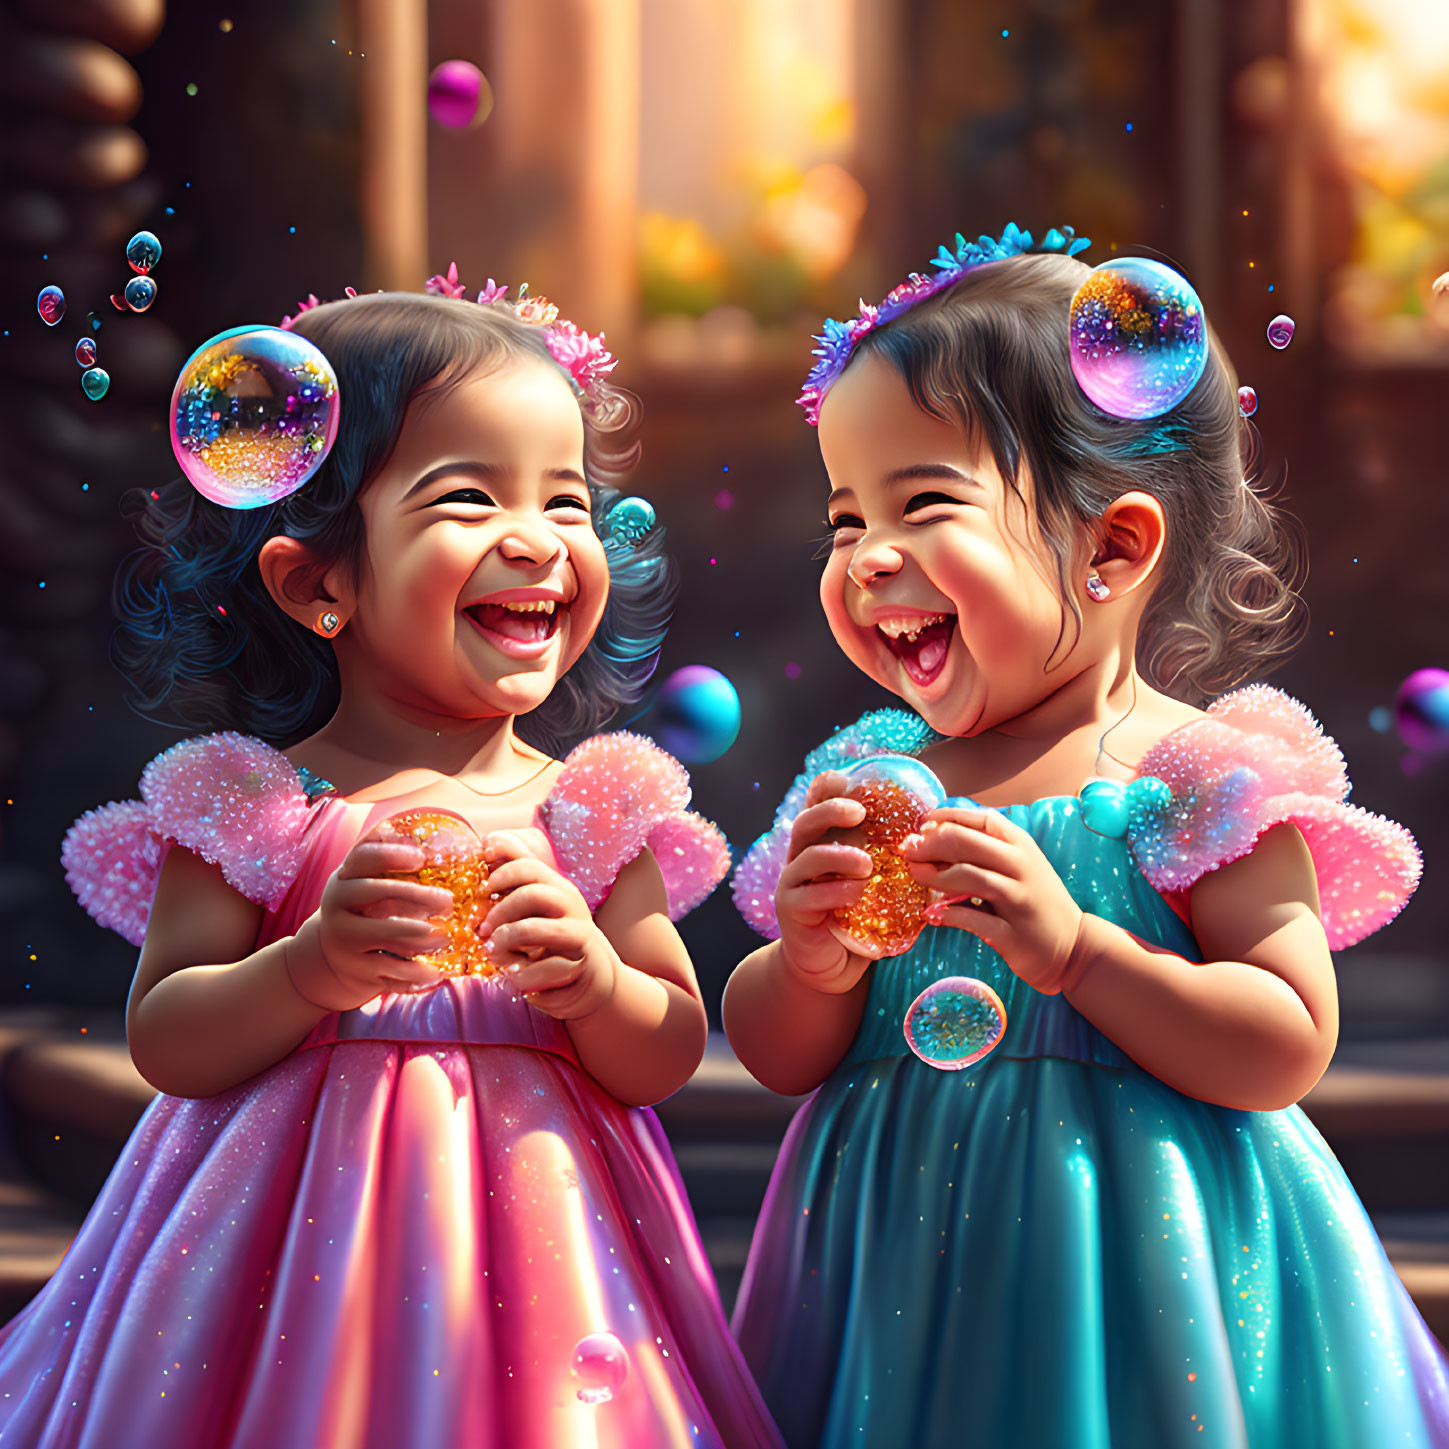 Two girls in sparkly dresses and tiaras playing with bubbles in a magical setting